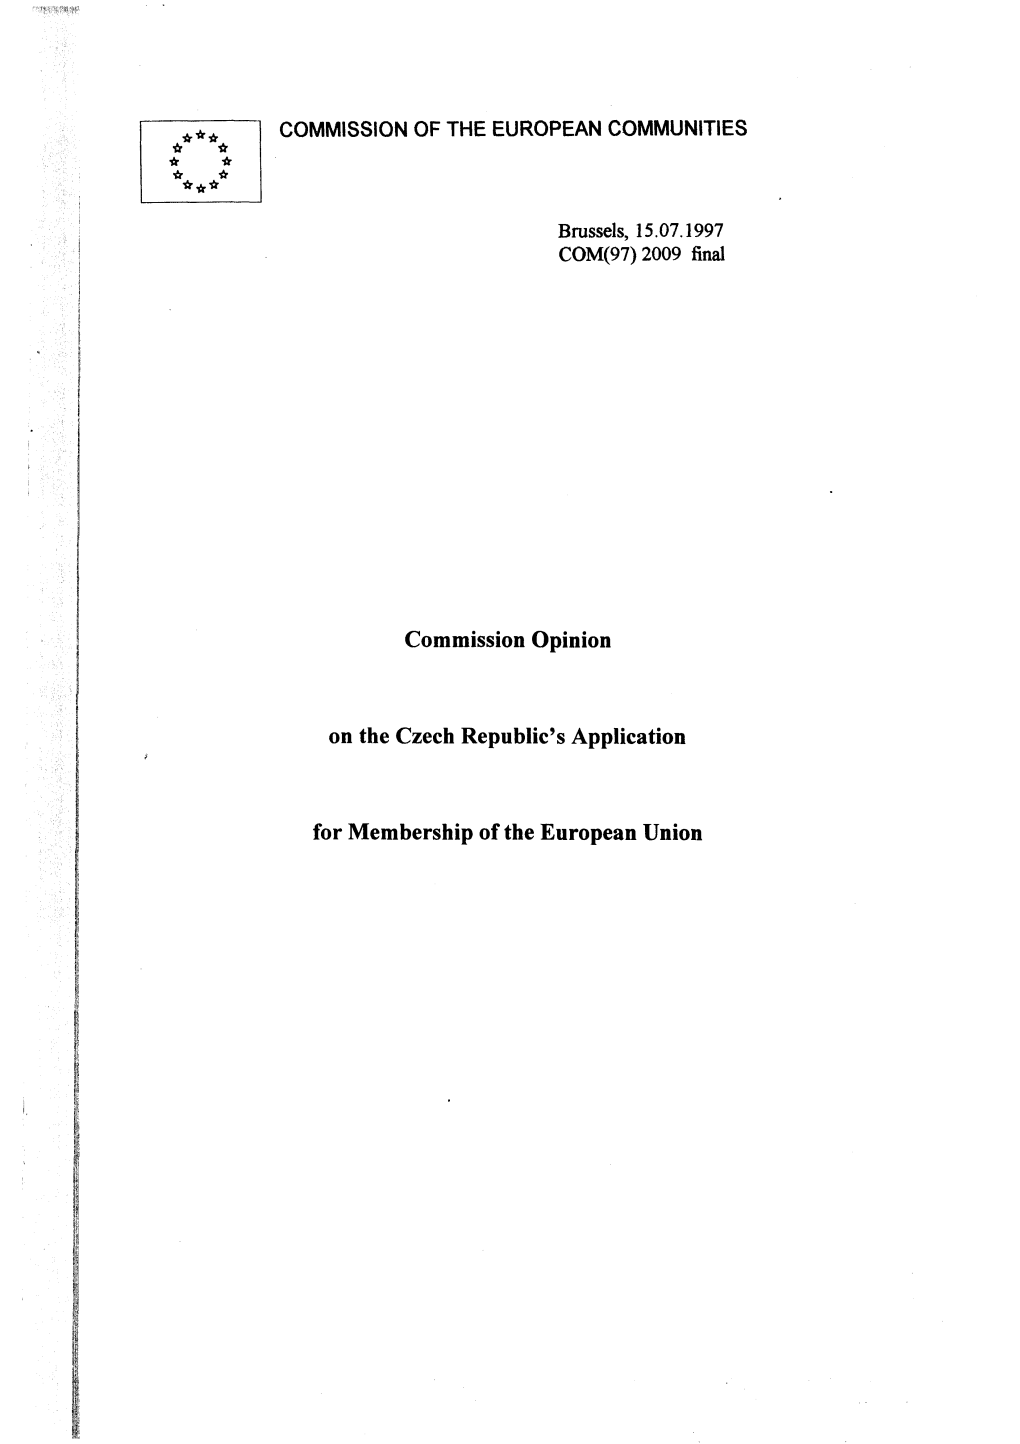 Commission Opinion on the Czech Republic's Application For